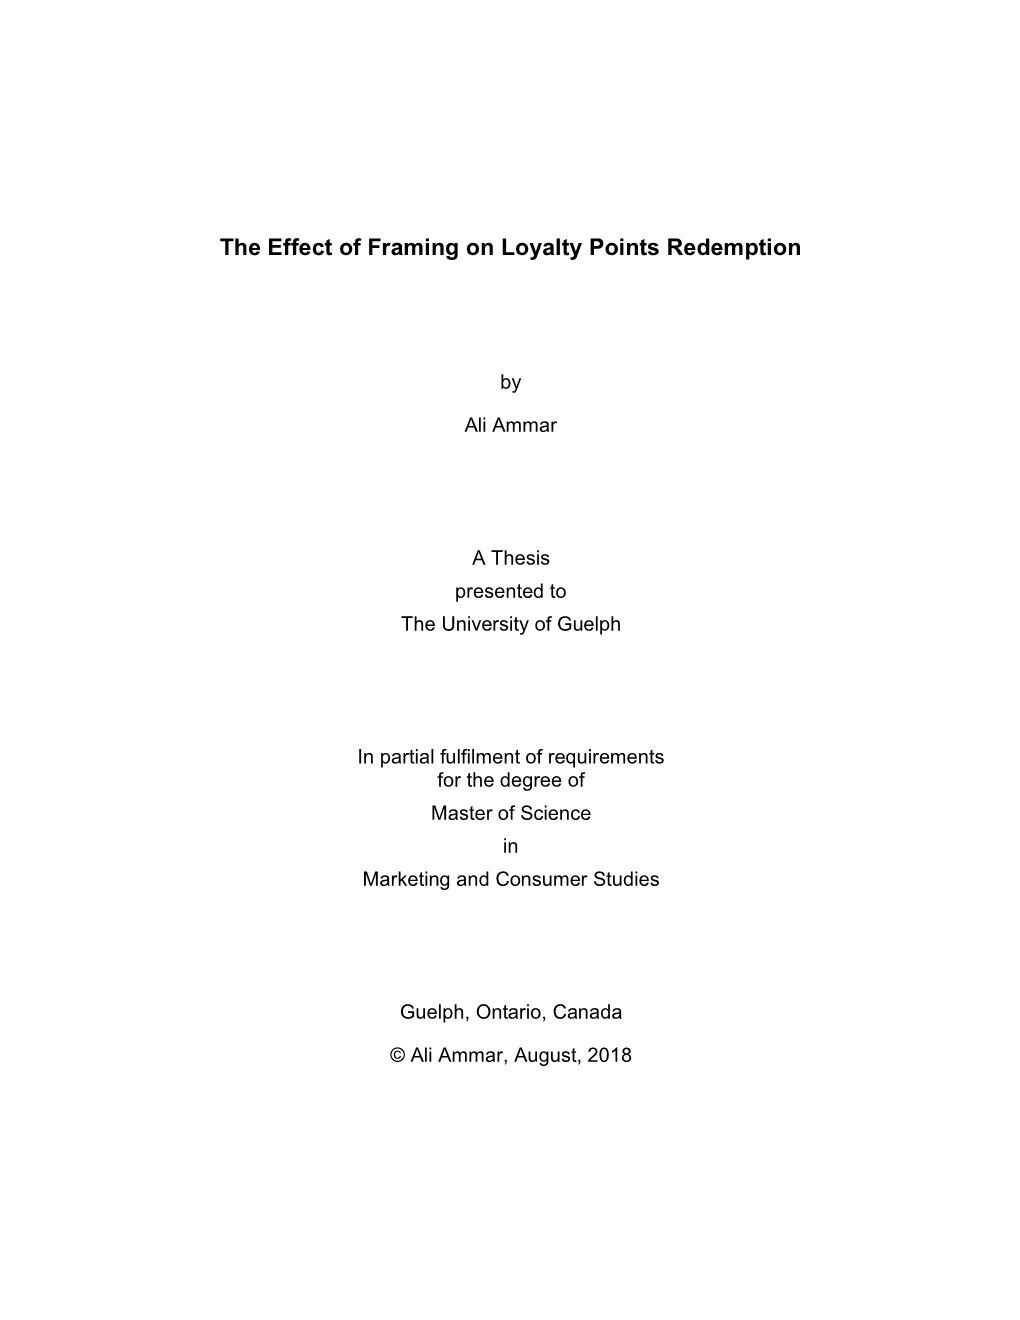 The Effect of Framing on Loyalty Points Redemption